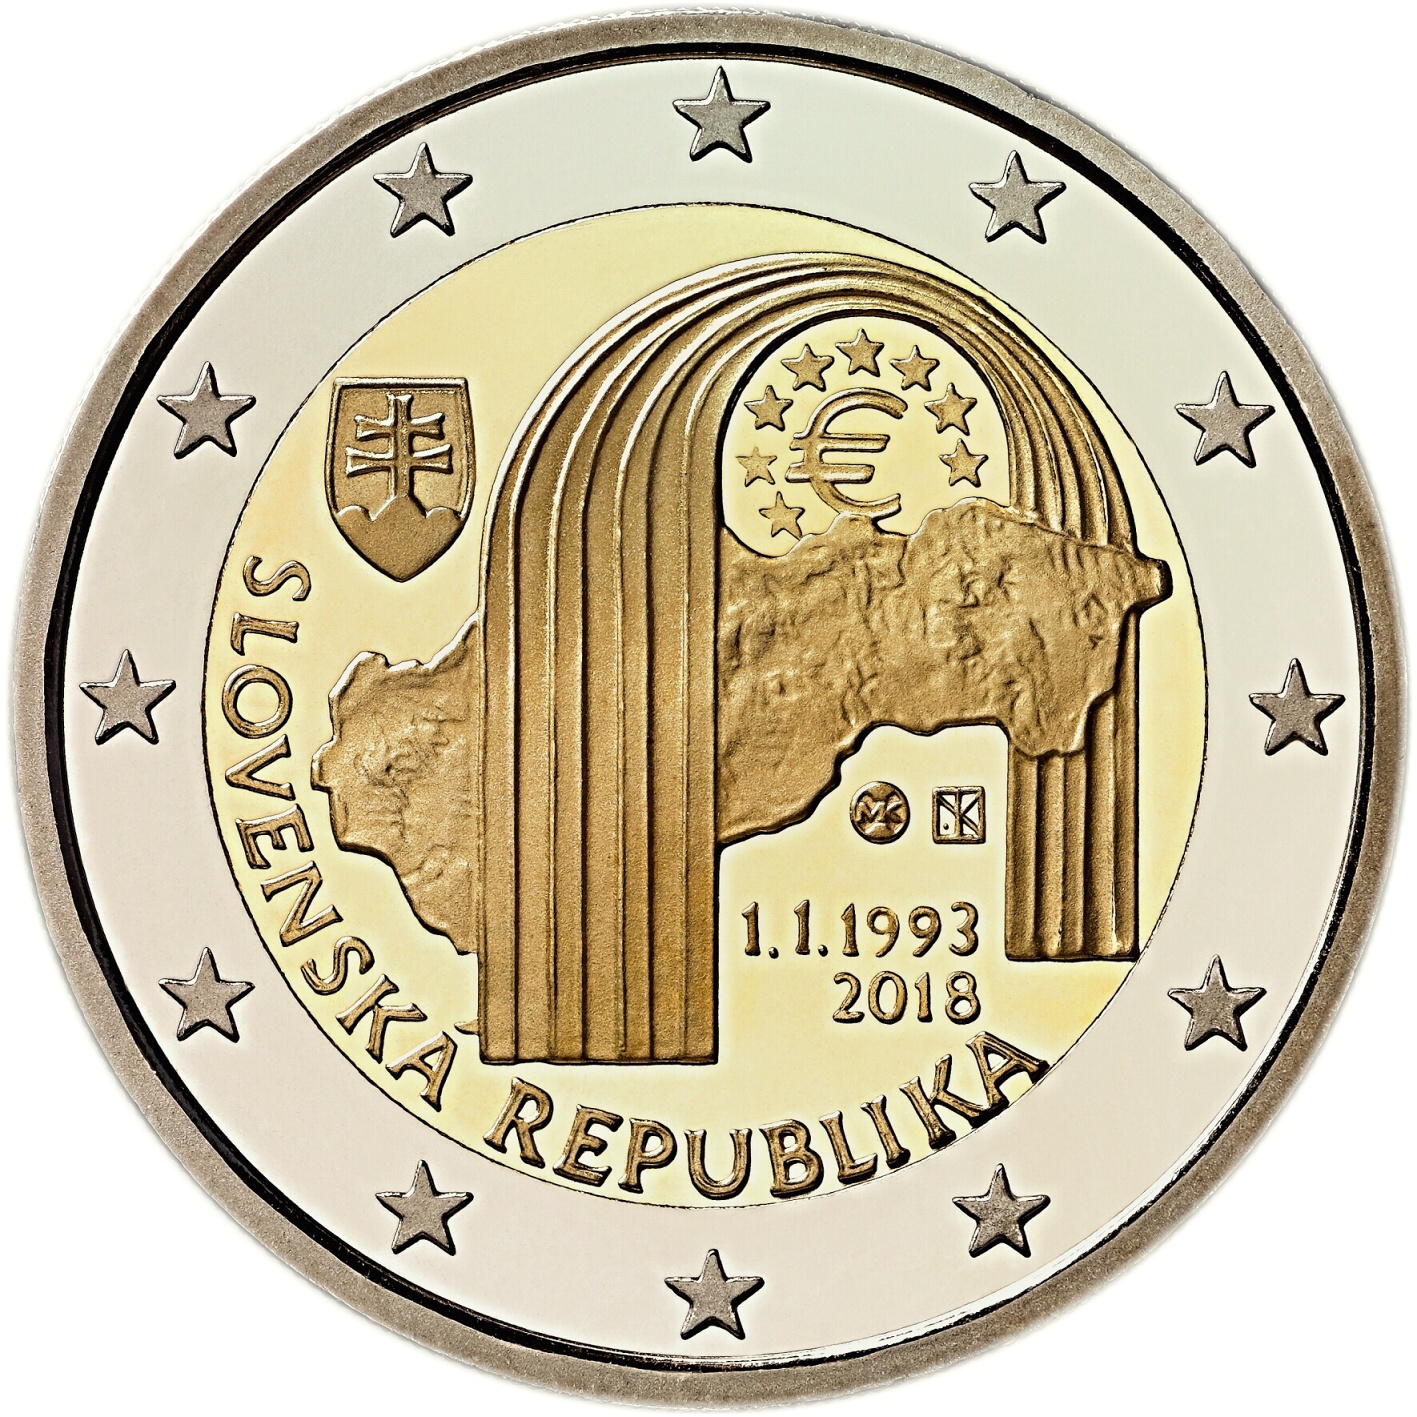 Banknotes and coins, 25th anniversary of the establishment of the Slovak Republic